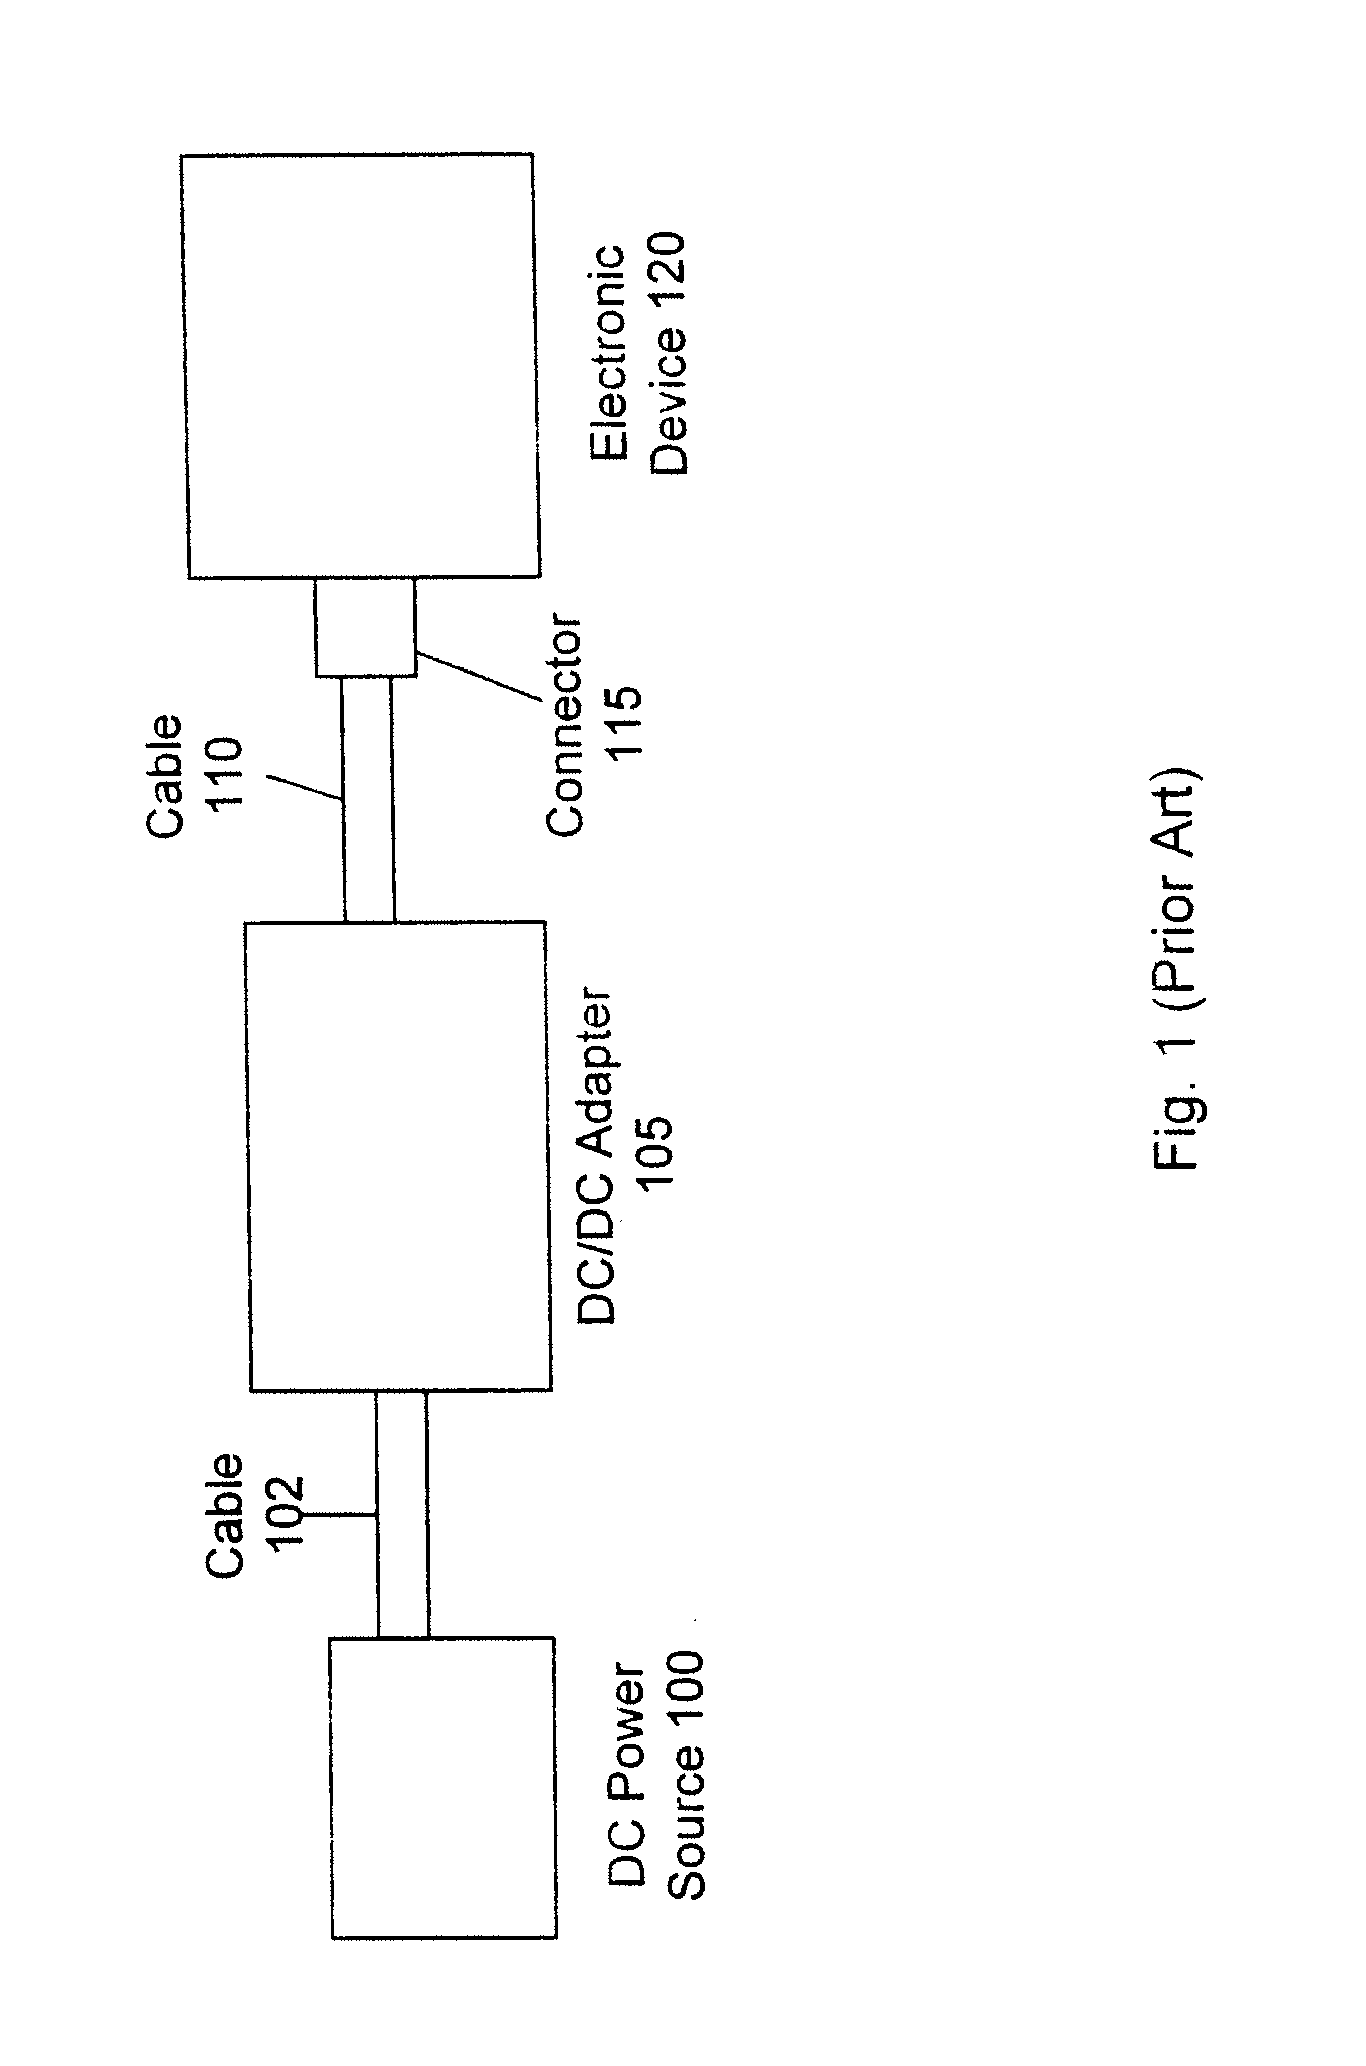 Power supply equipment utilizing interchangeable tips to provide power and a power indication signal to an electronic device